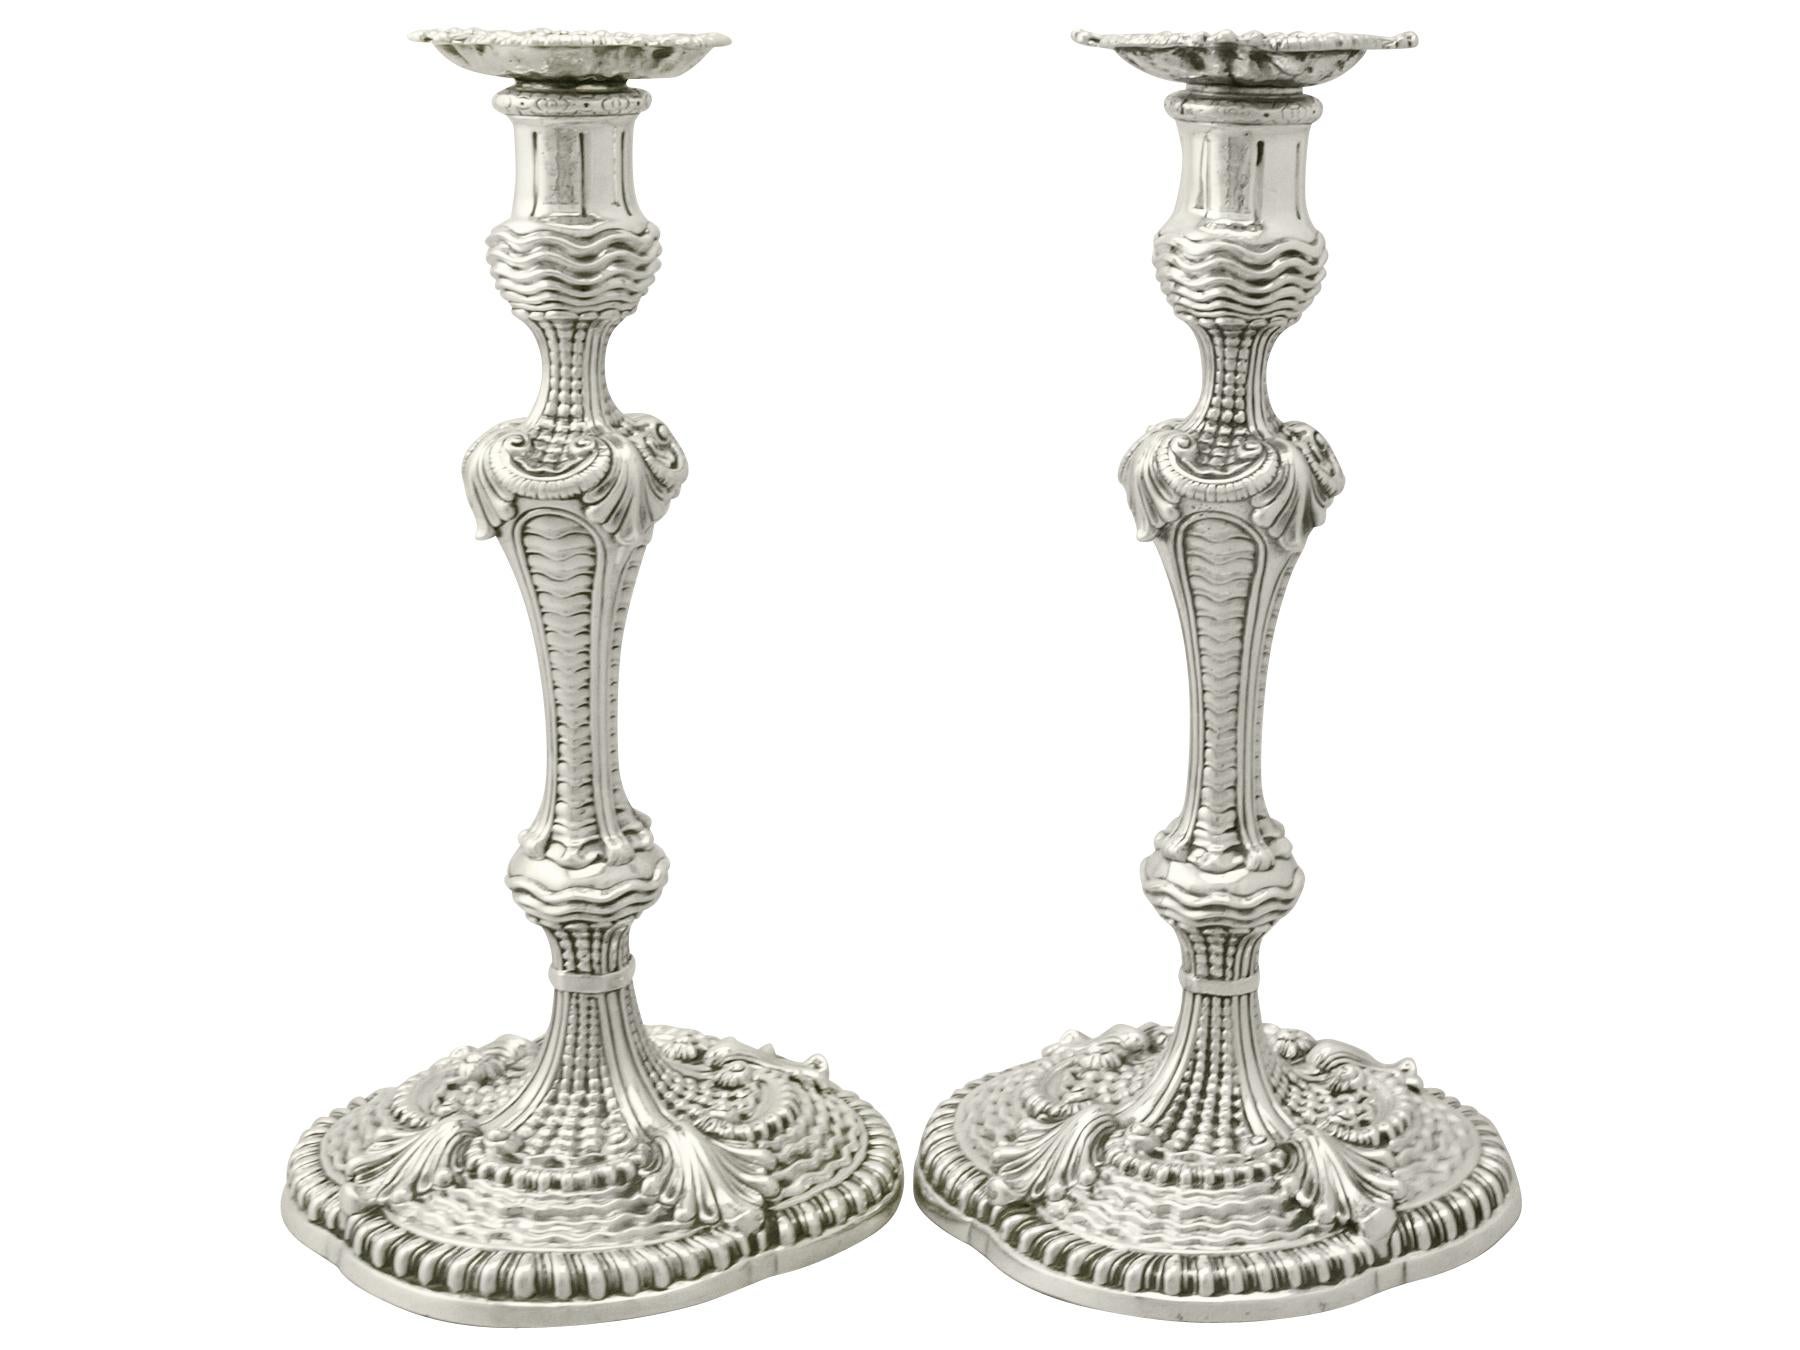 A magnificent, fine and unusual pair of antique Georgian English cast sterling silver candlesticks; an addition of our ornamental silverware collection.

These magnificent antique George II cast sterling silver candlesticks have a baluster shaped